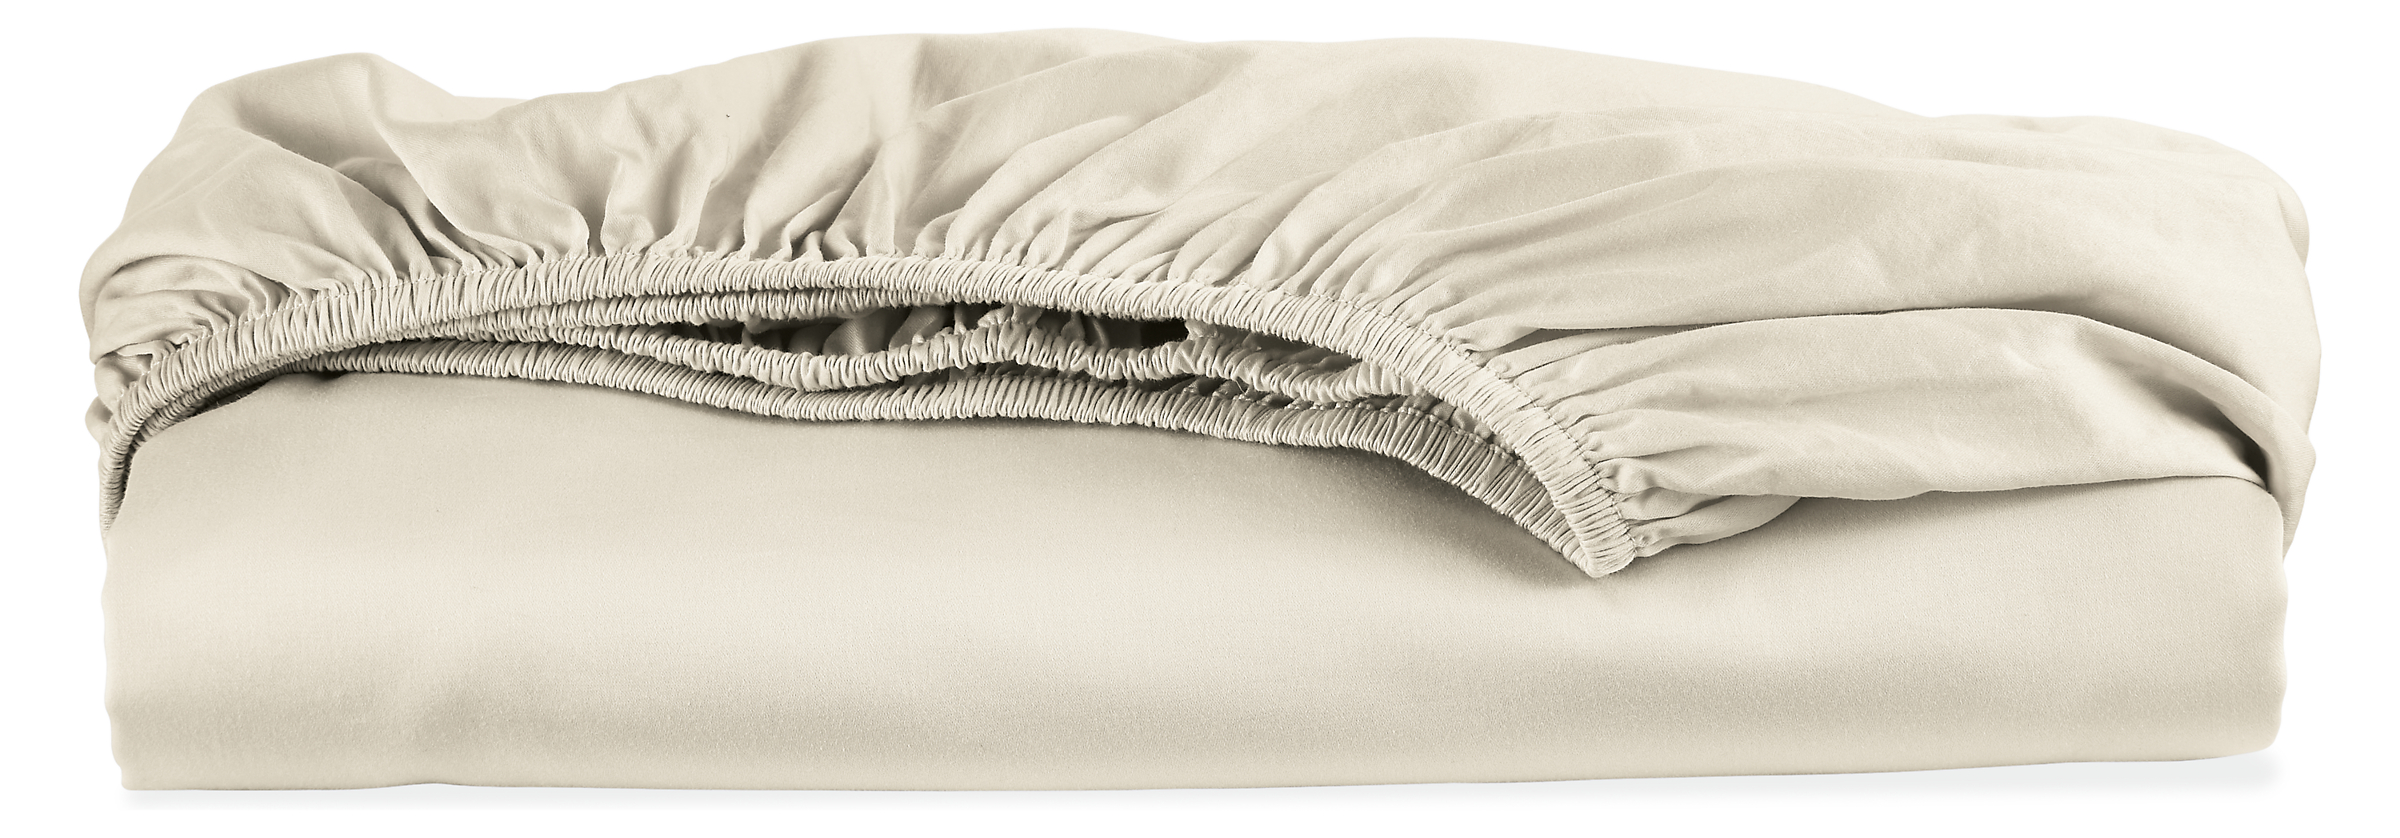 Tailored Sateen Queen Fitted Sheet